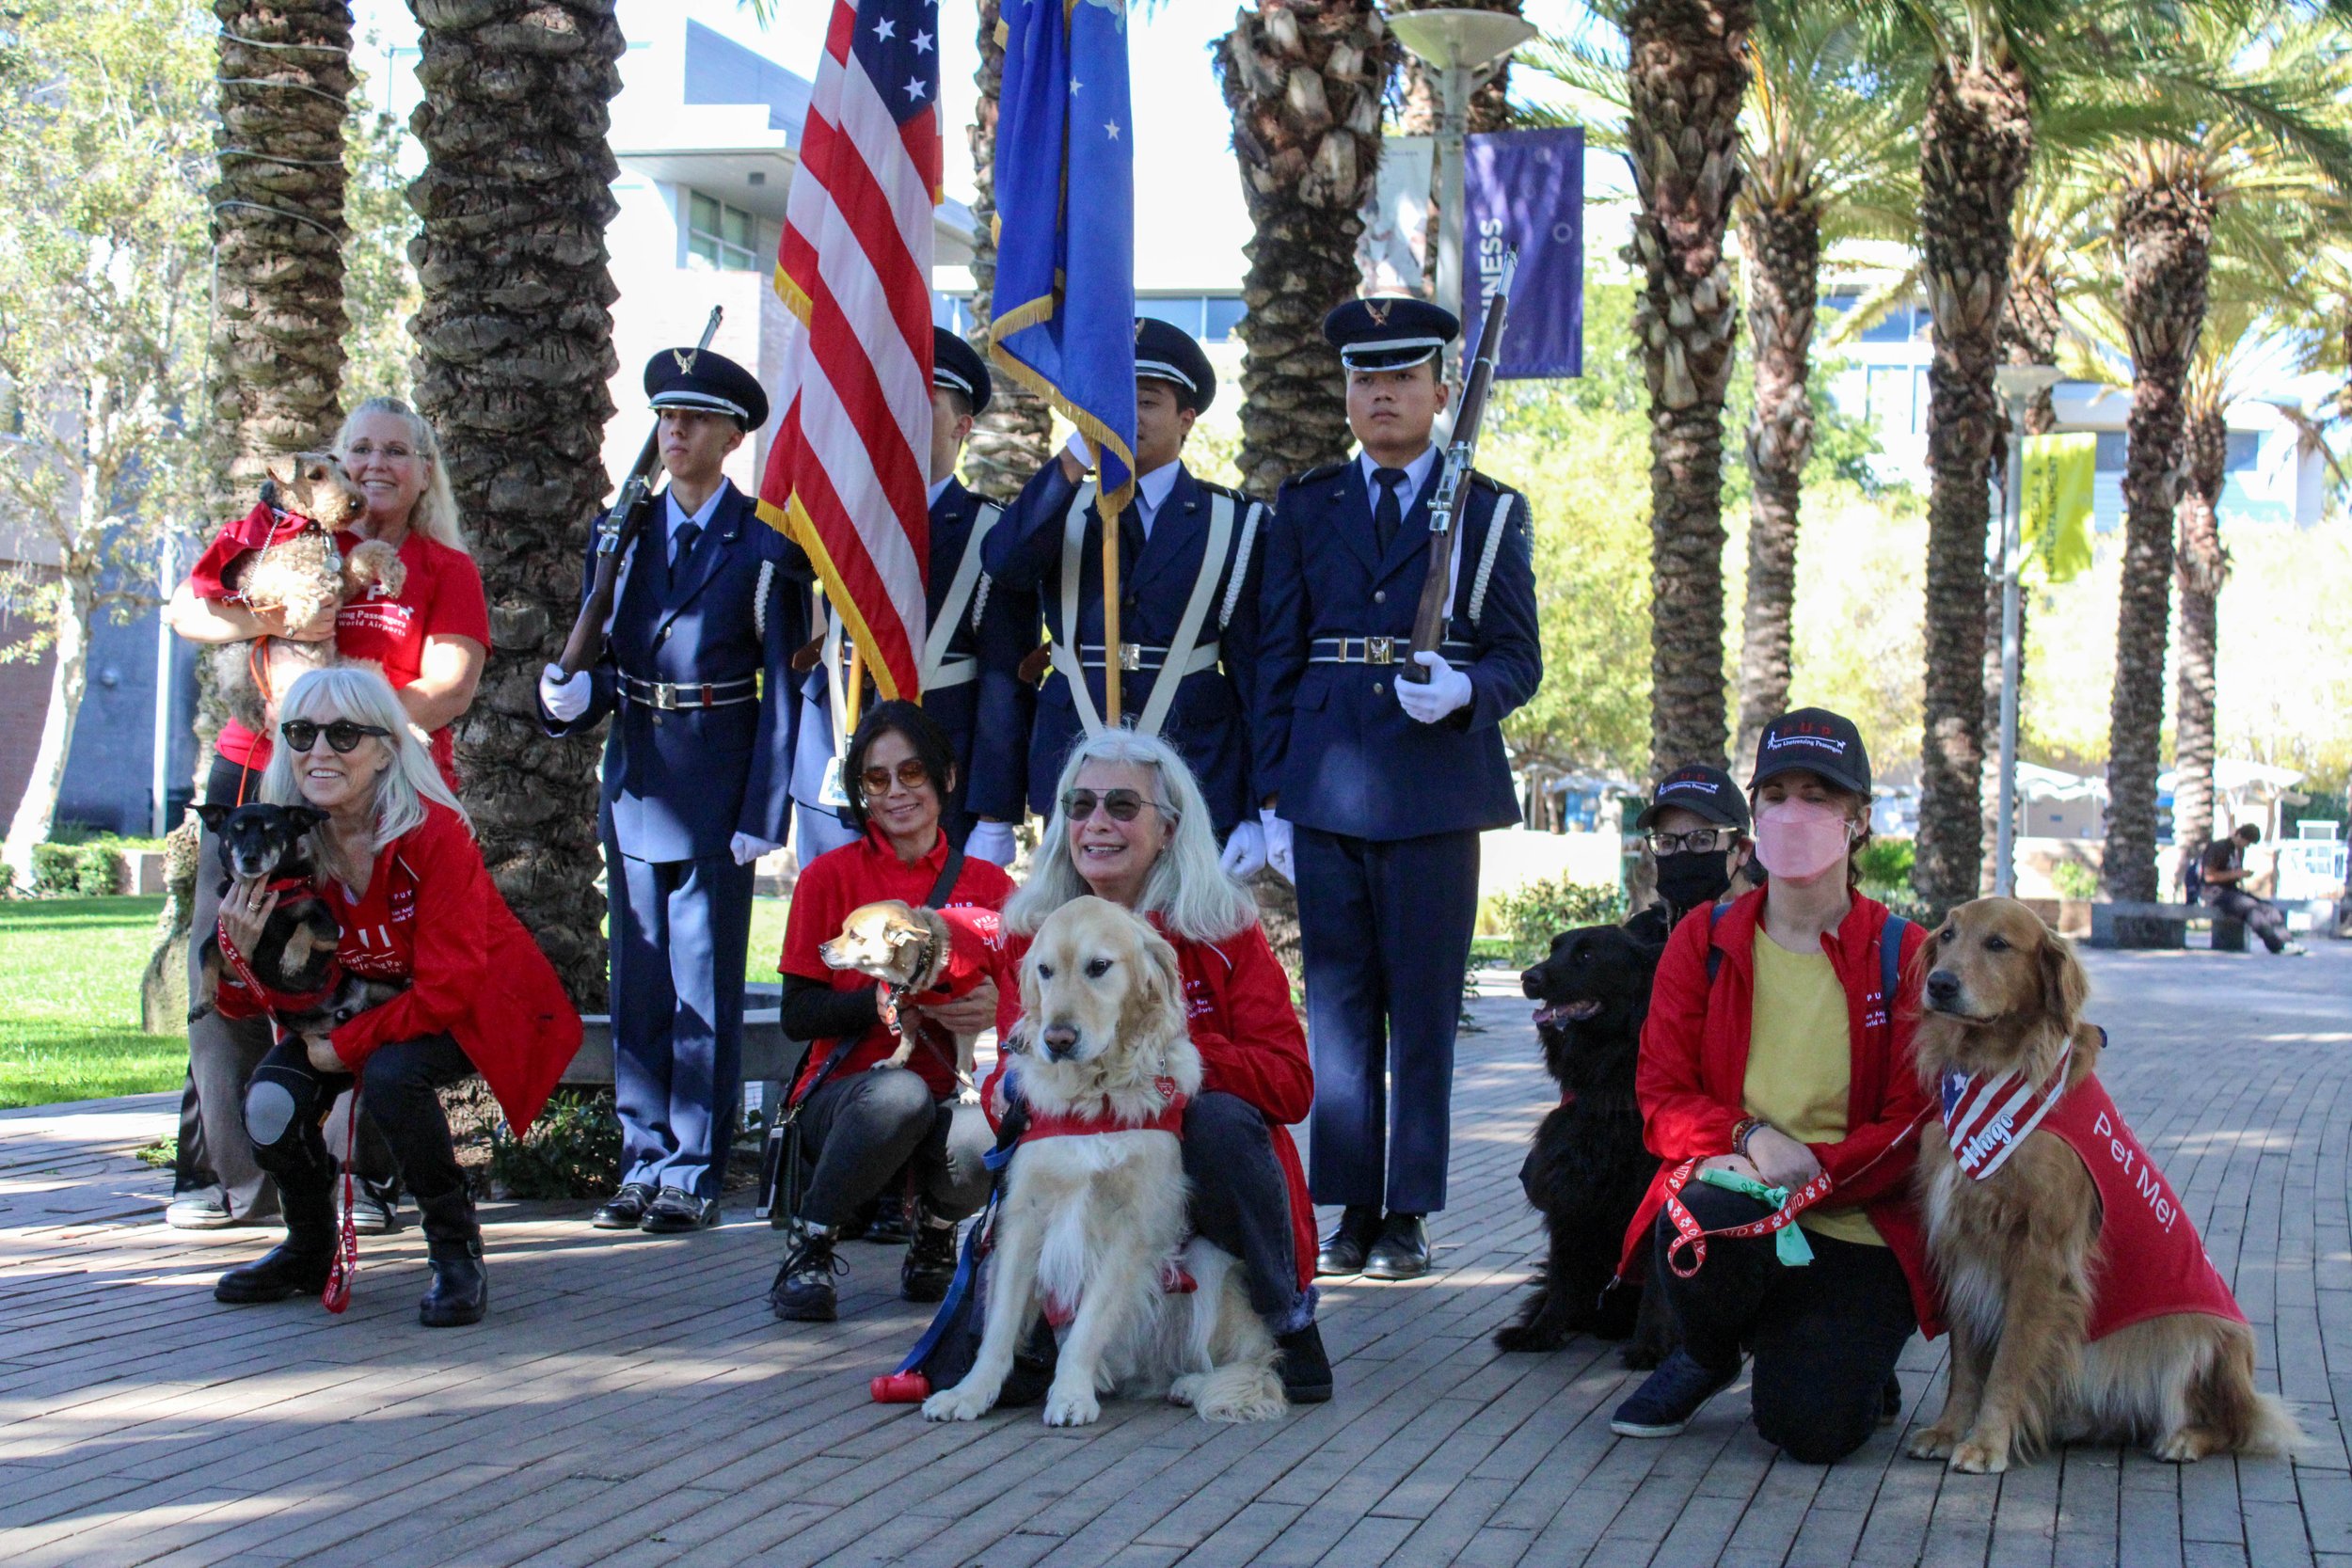  P.U.P. (Pets Unstressing Passengers) with the UCLA Air Force ROTC taking a group photo at the Veterans Ceremony at Santa Monica College. (Reis Novakovic | The Corsair) 